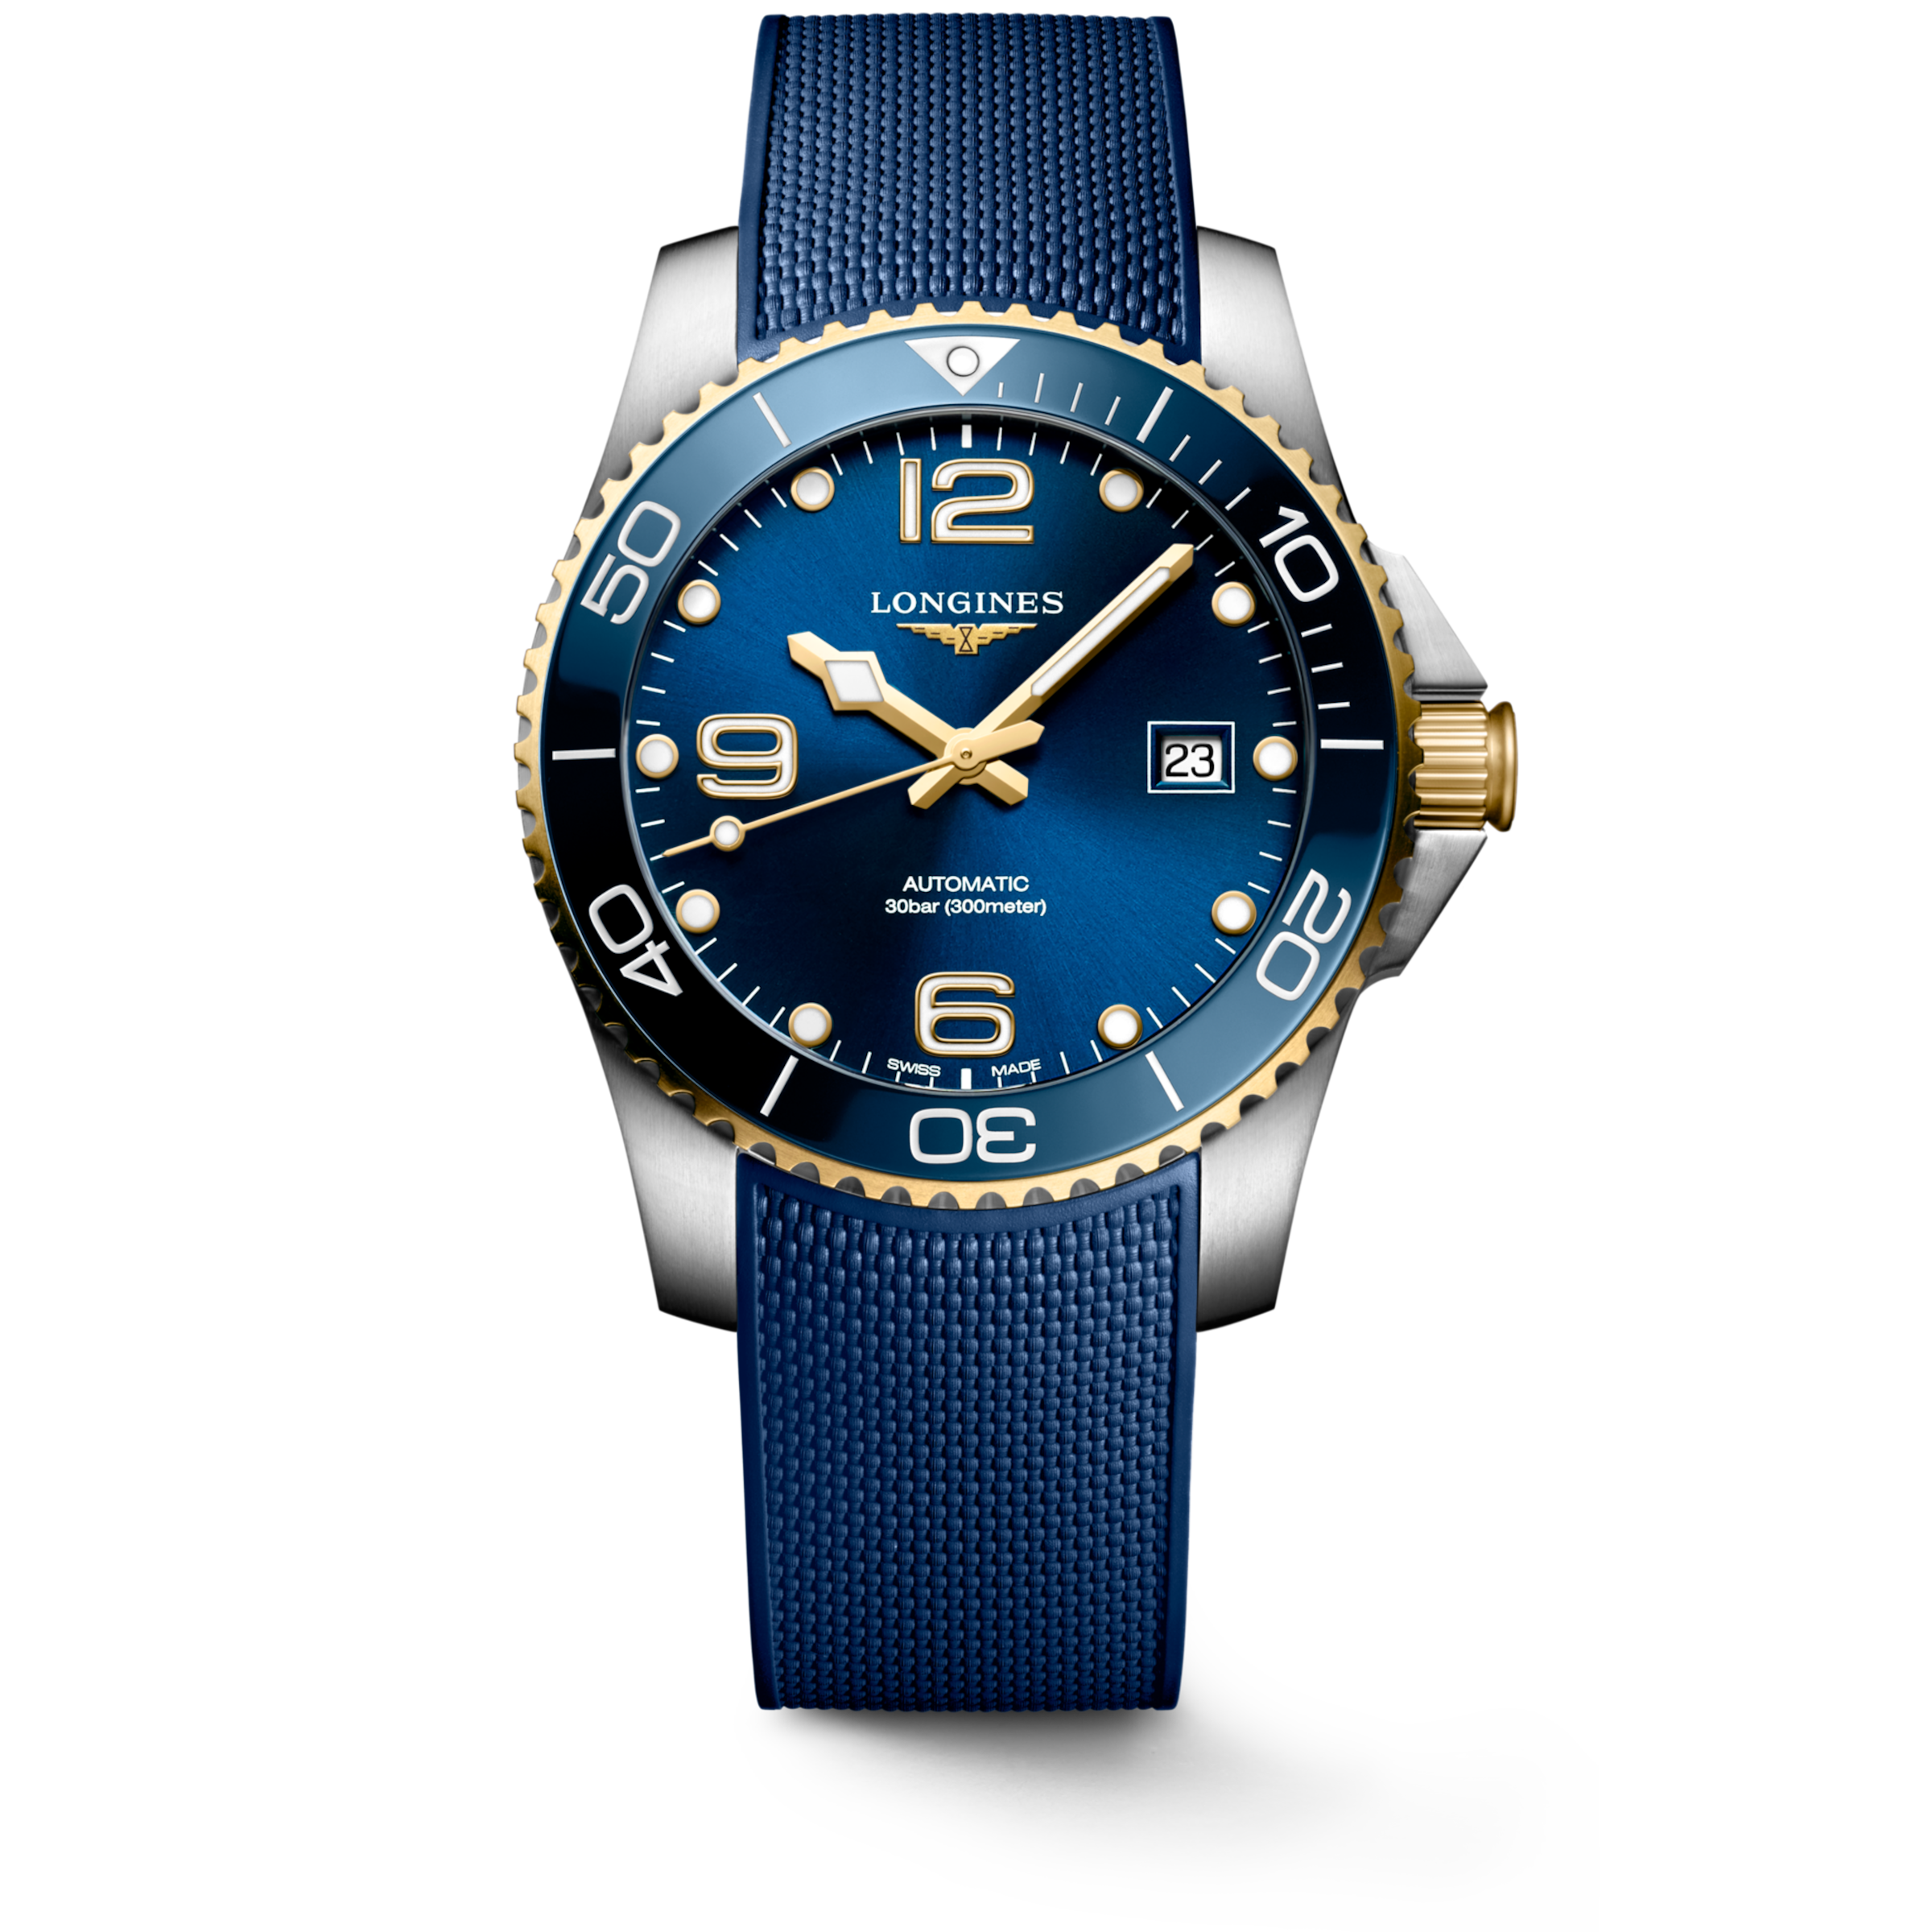 Longines HYDROCONQUEST Automatic Stainless steel and ceramic bezel Watch - L3.781.3.96.9